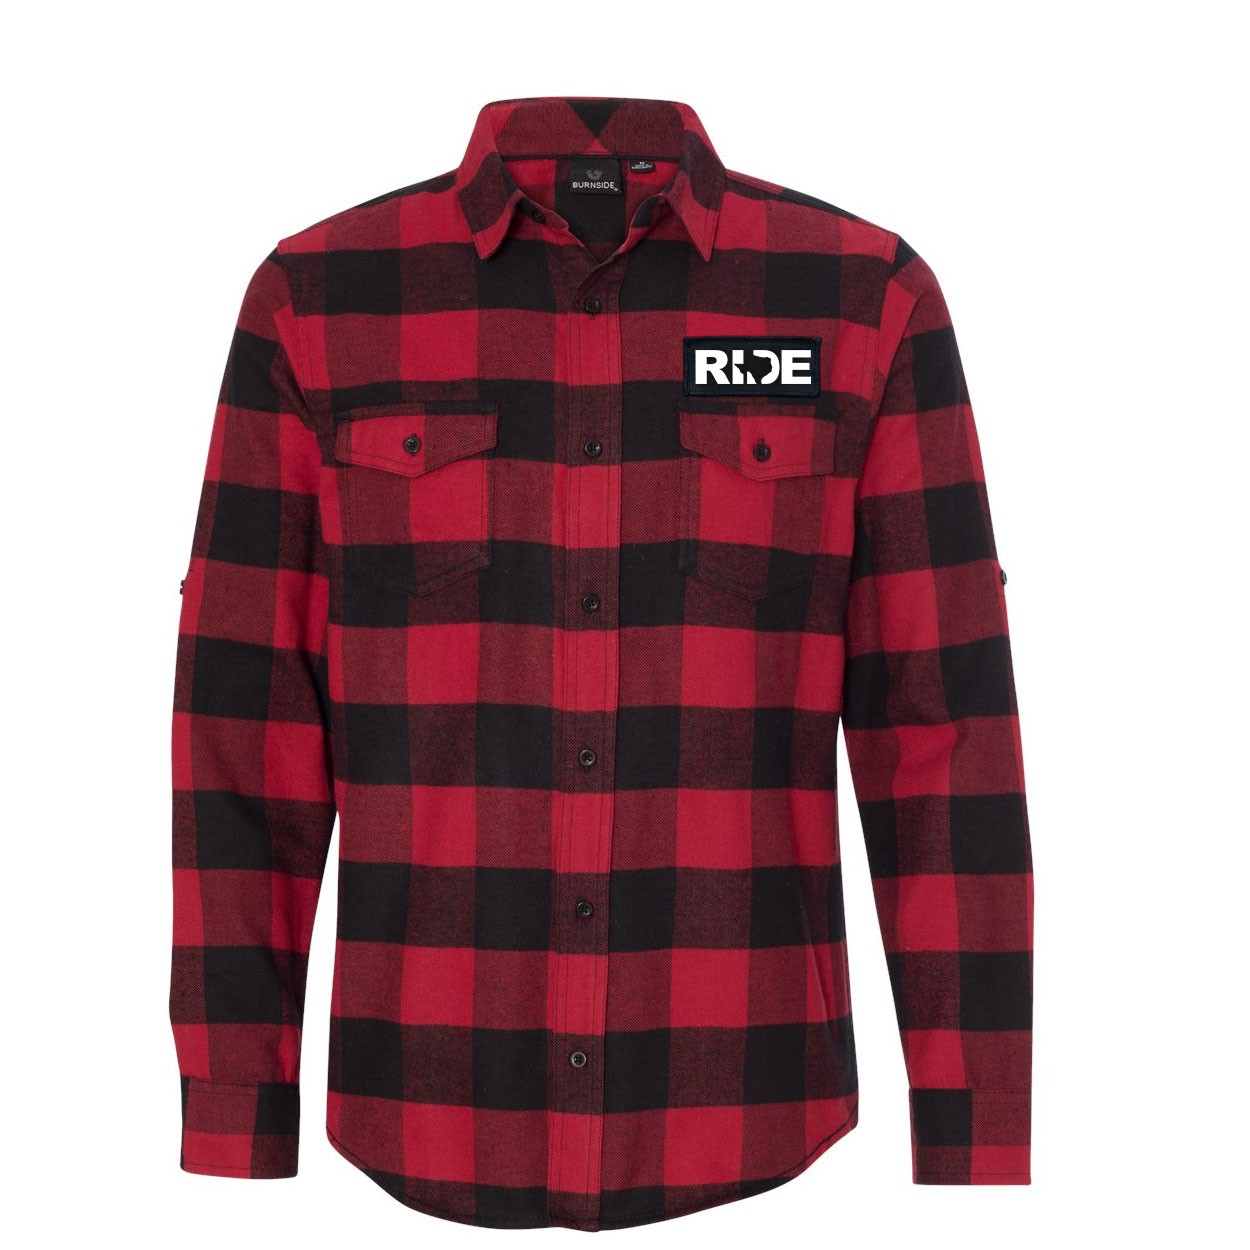 Ride Texas Classic Unisex Long Sleeve Woven Patch Flannel Shirt Red/Black Buffalo (White Logo)